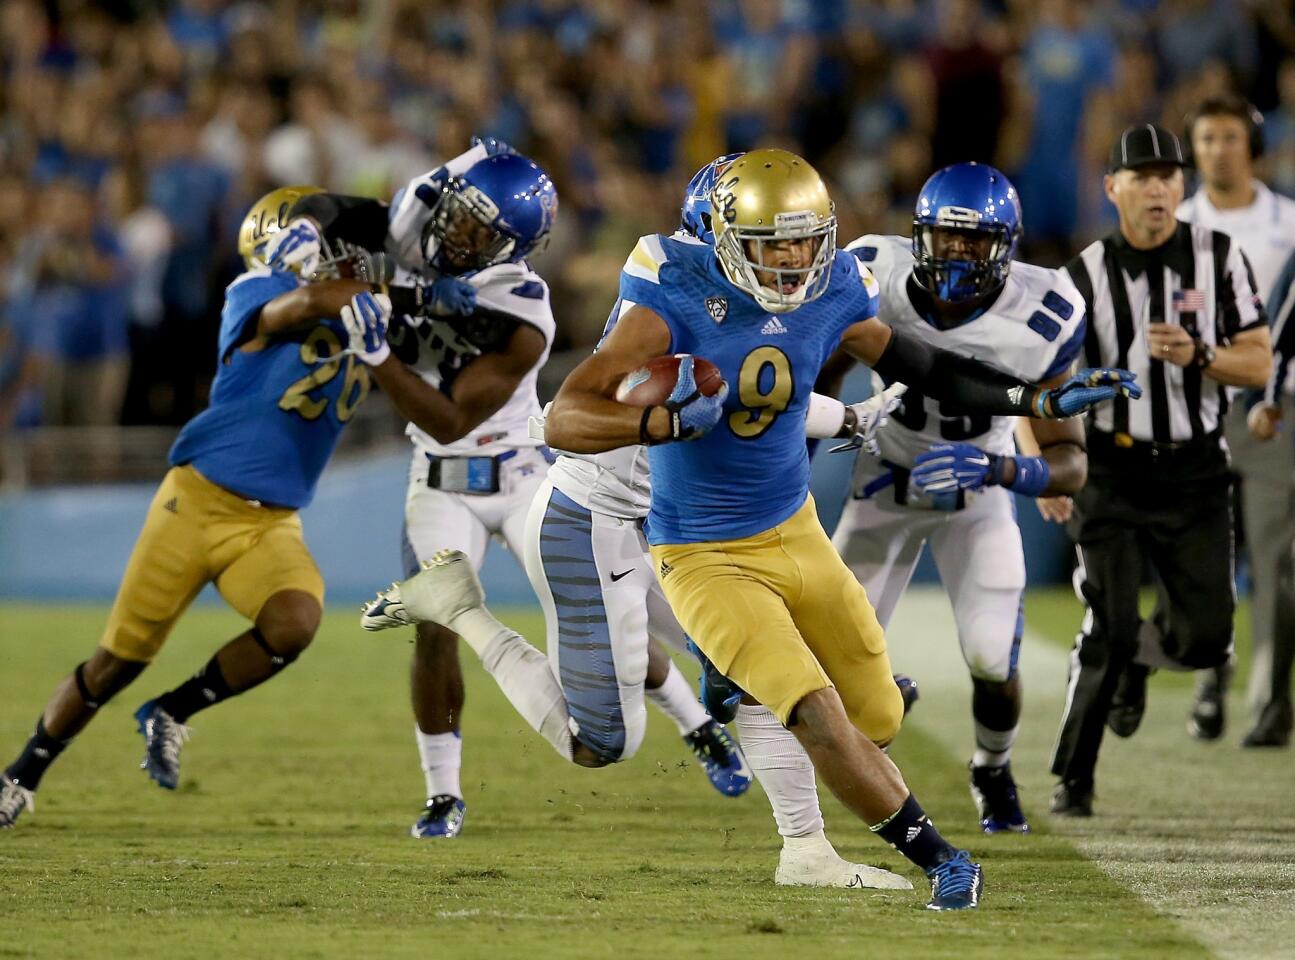 UCLA receiver Jordan Payton finds running room along the sideline after making a catch against Memphis in the third quarter Saturday at the Rose Bowl.